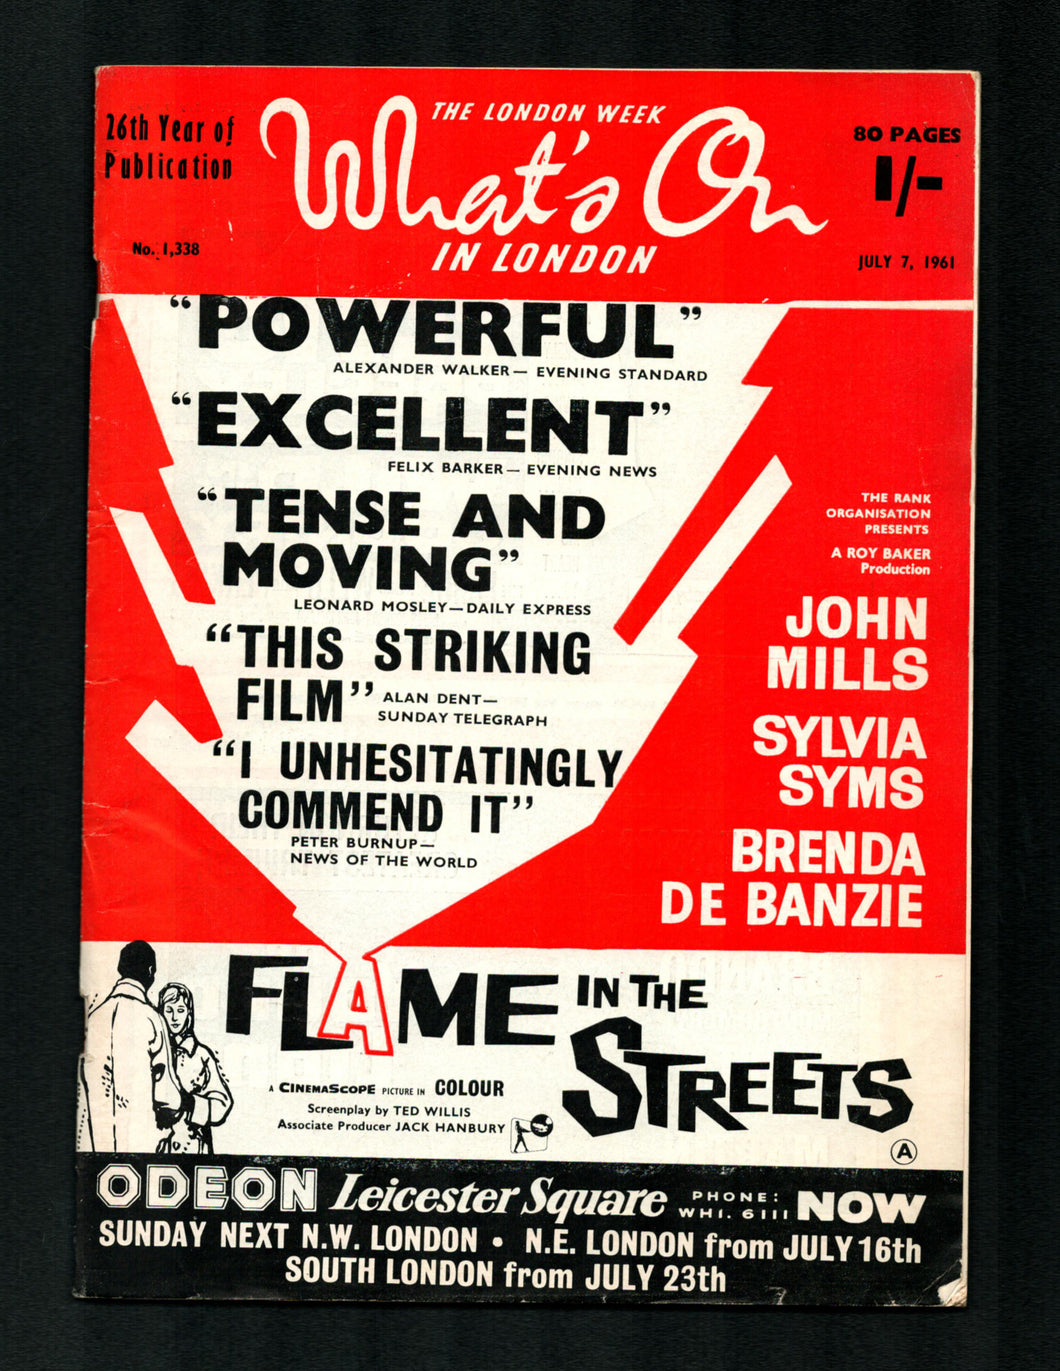 Whats on in London No 1338 July 7 1961